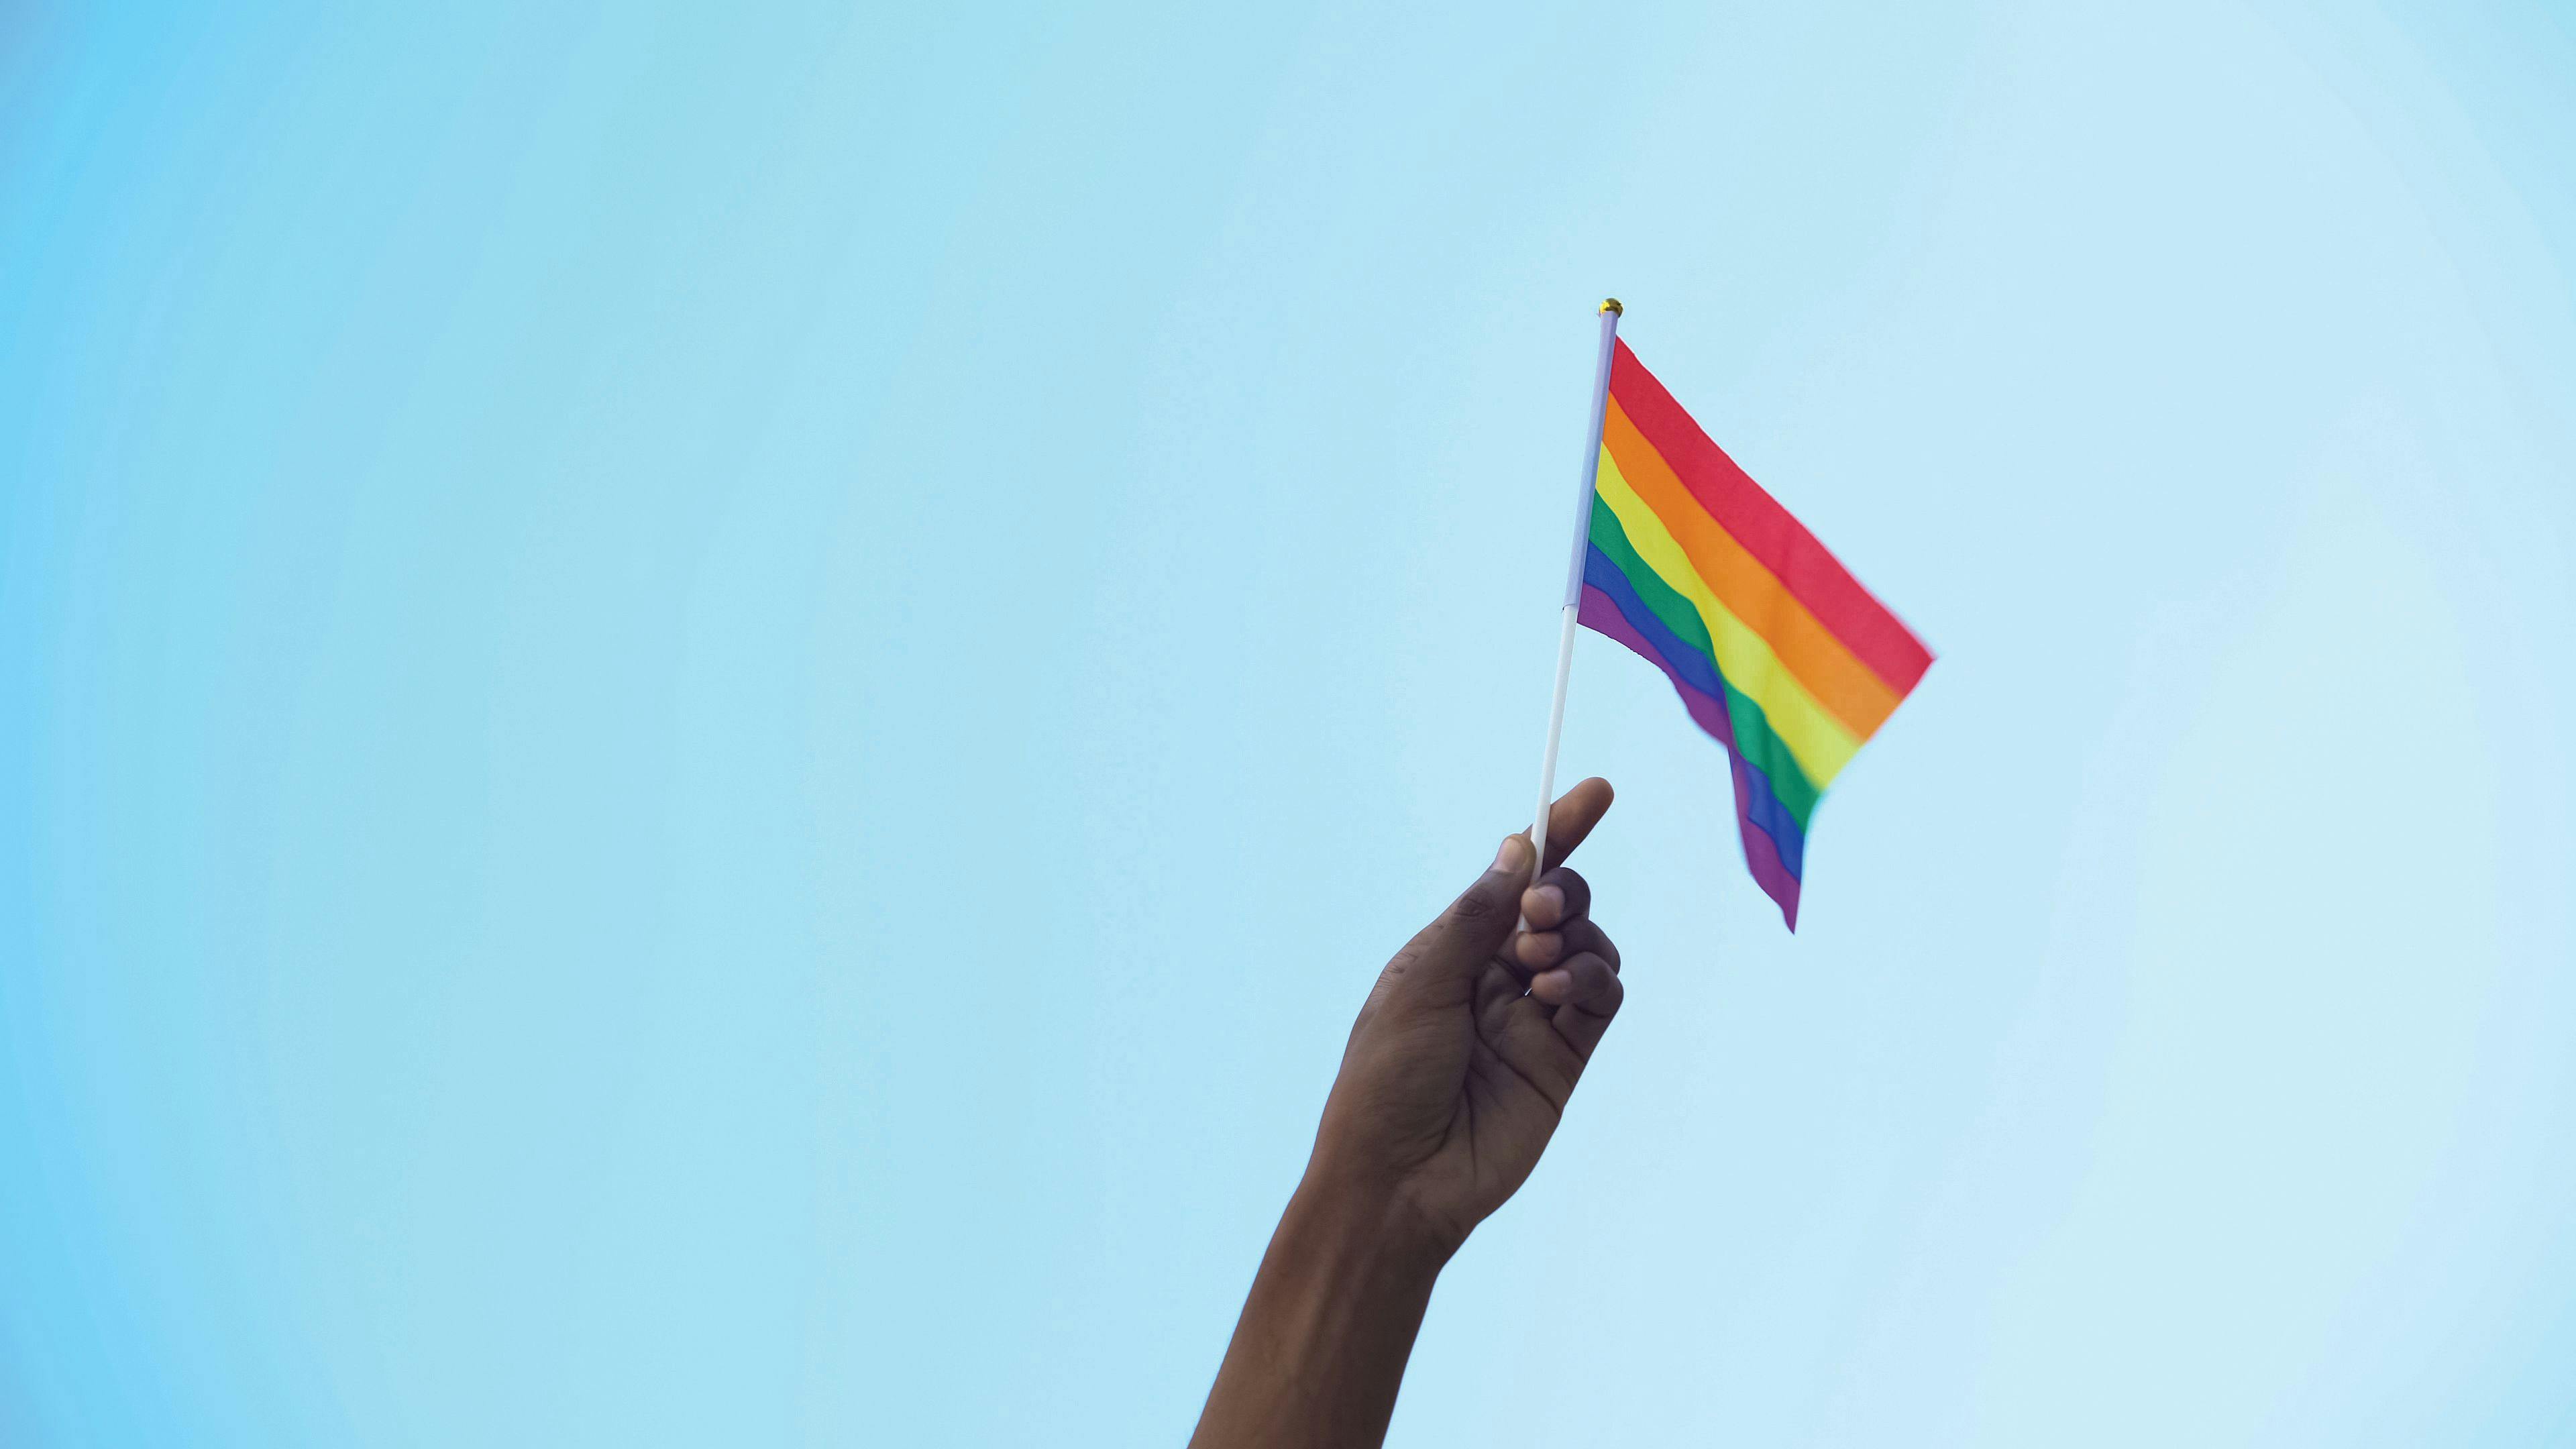 Helping LGBTQ Youth During the Pandemic